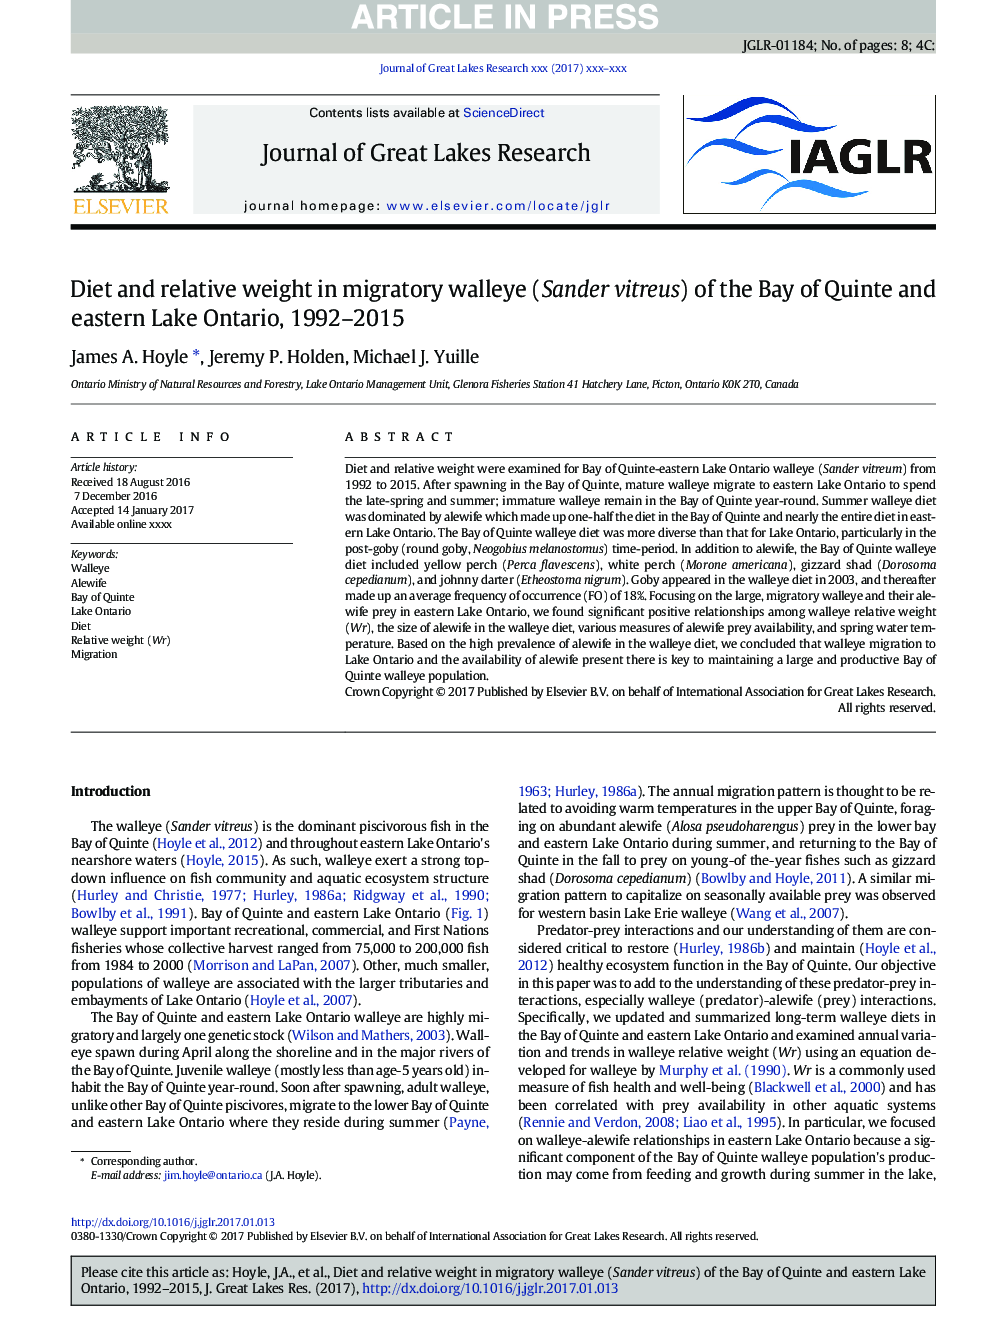 Diet and relative weight in migratory walleye (Sander vitreus) of the Bay of Quinte and eastern Lake Ontario, 1992-2015